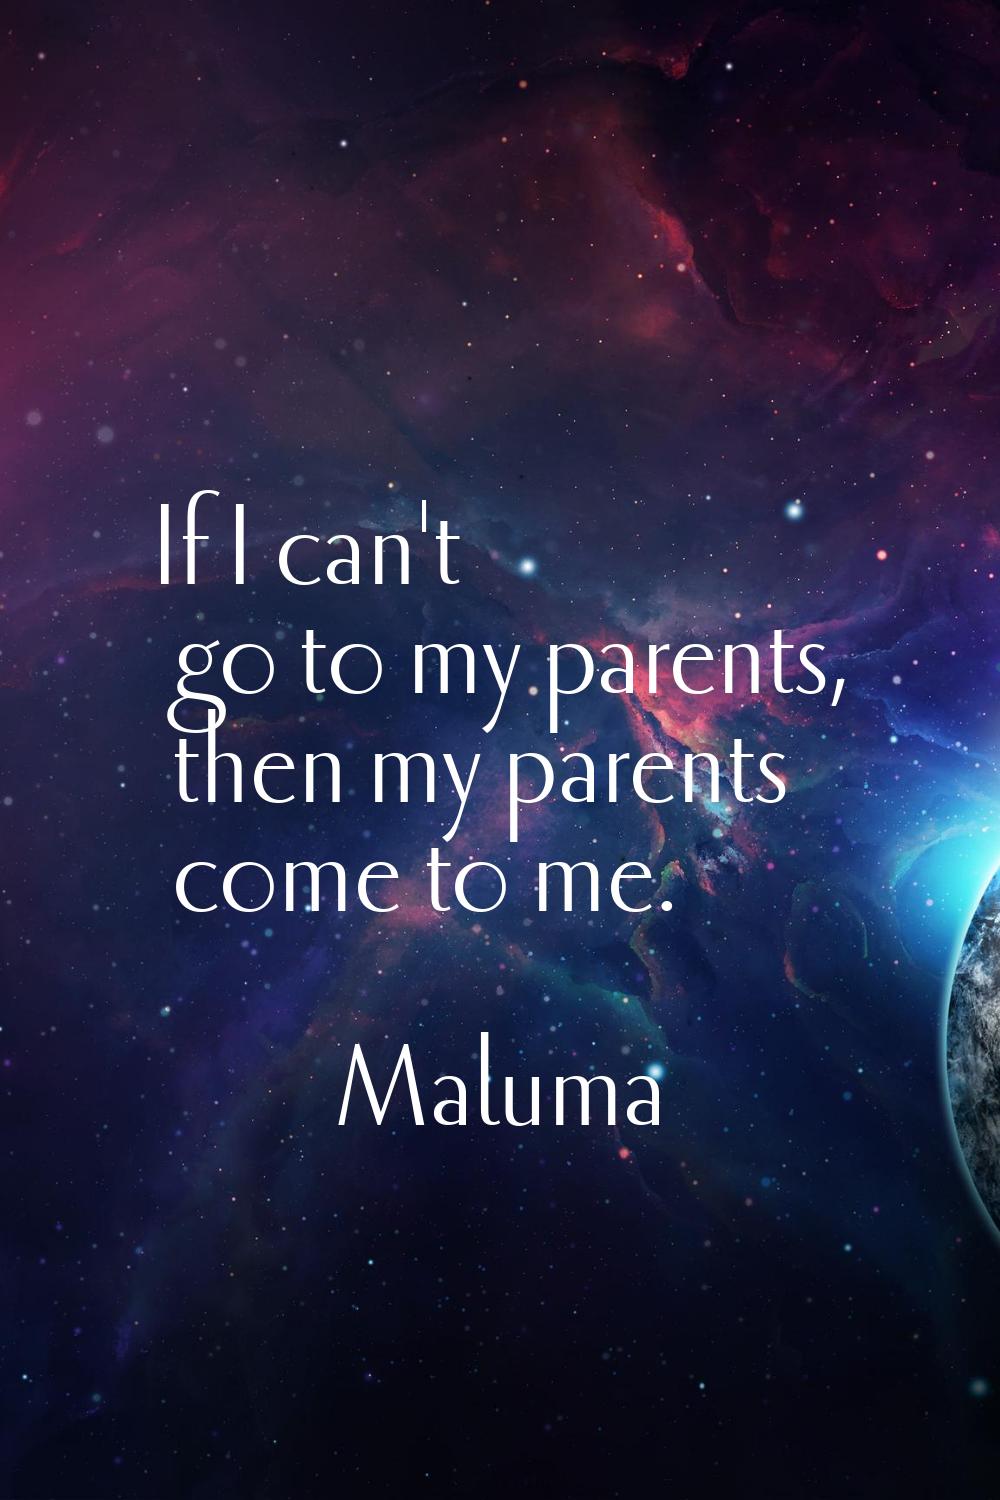 If I can't go to my parents, then my parents come to me.